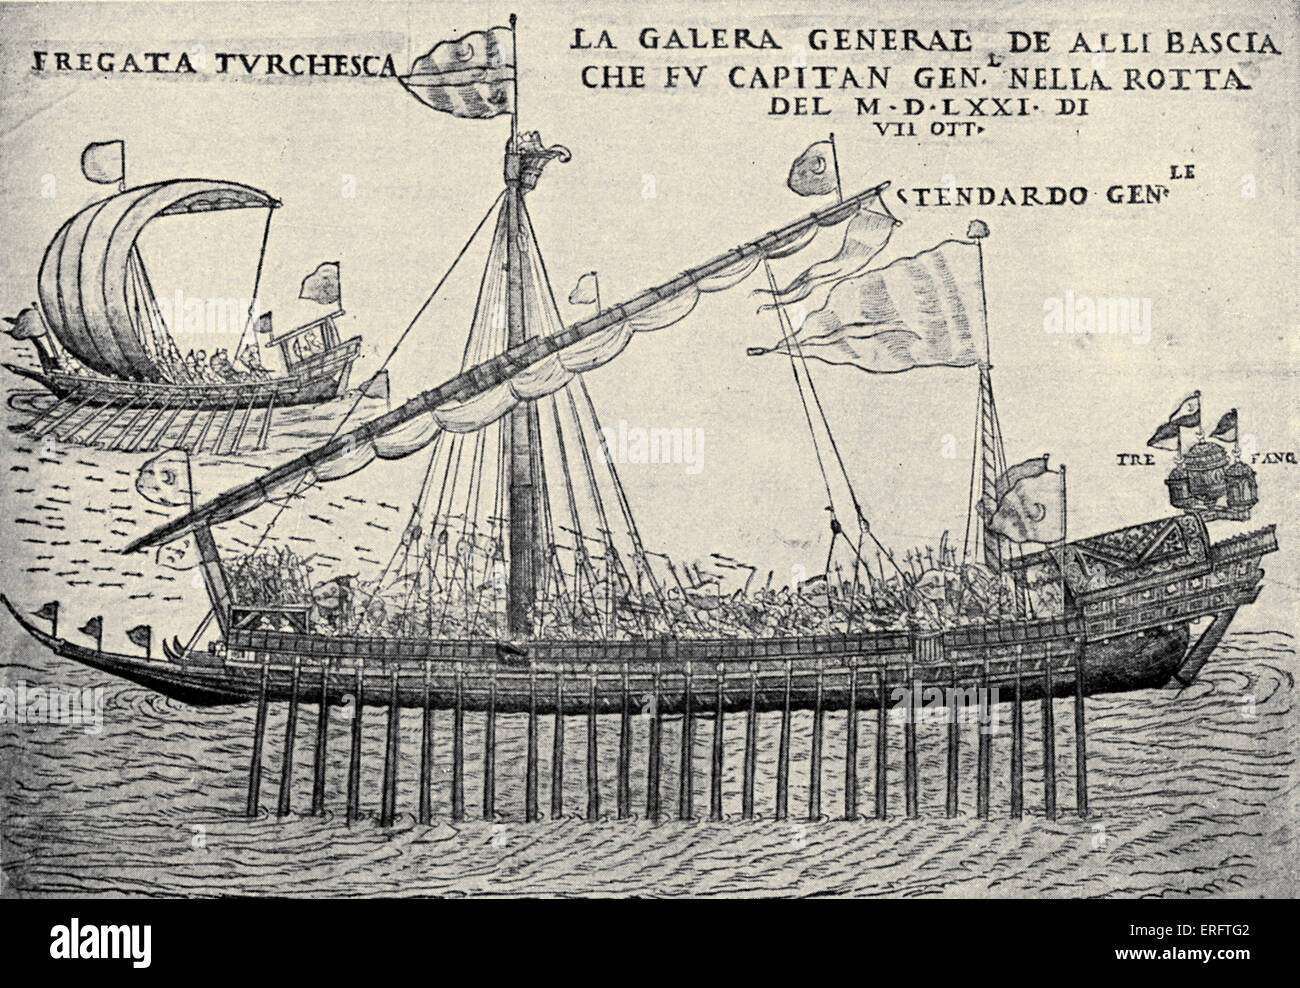 Turkish battleship in the 16th century - engraving by Melchior Lorichs. Stock Photo